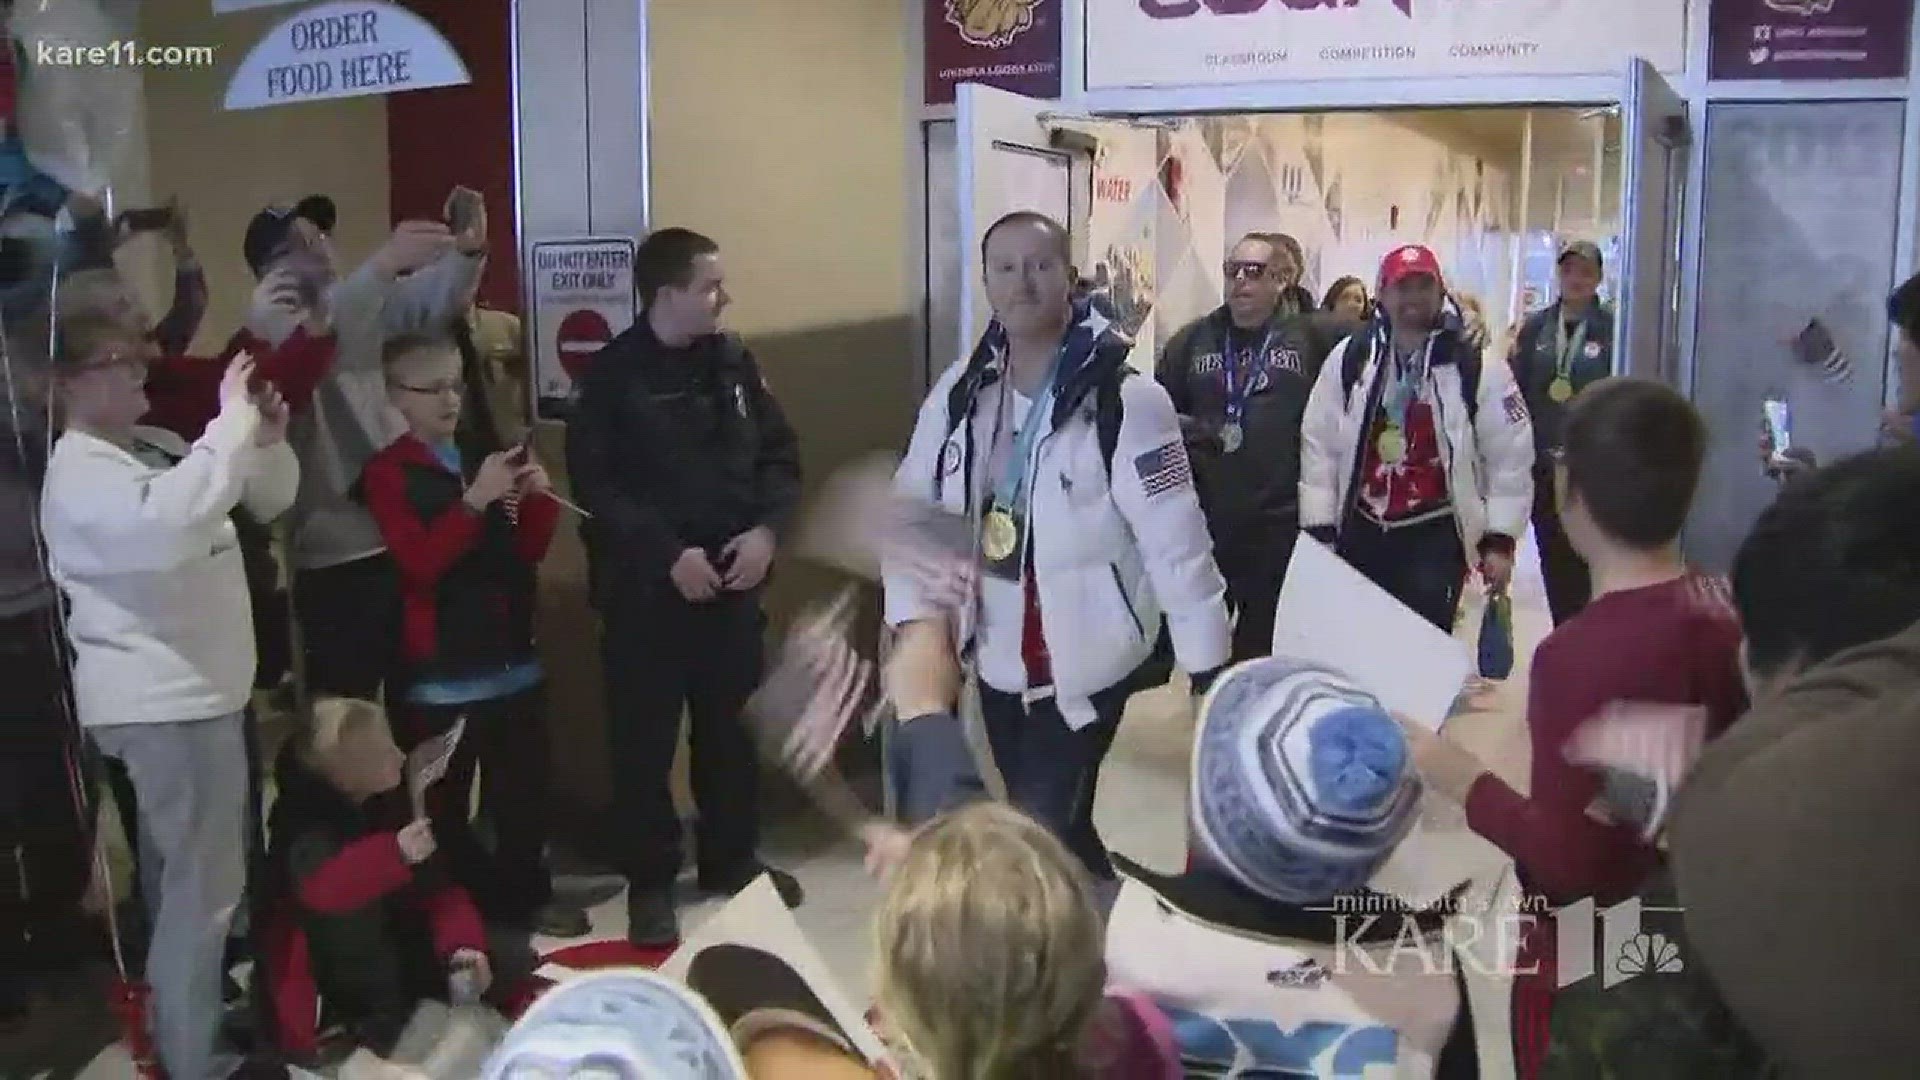 Team Shuster, the USA gold-medal-winning curling team returned home to a gold medal welcome at the Duluth International Airport, as hundreds of people met them at the gate. http://kare11.tv/2owmNGP